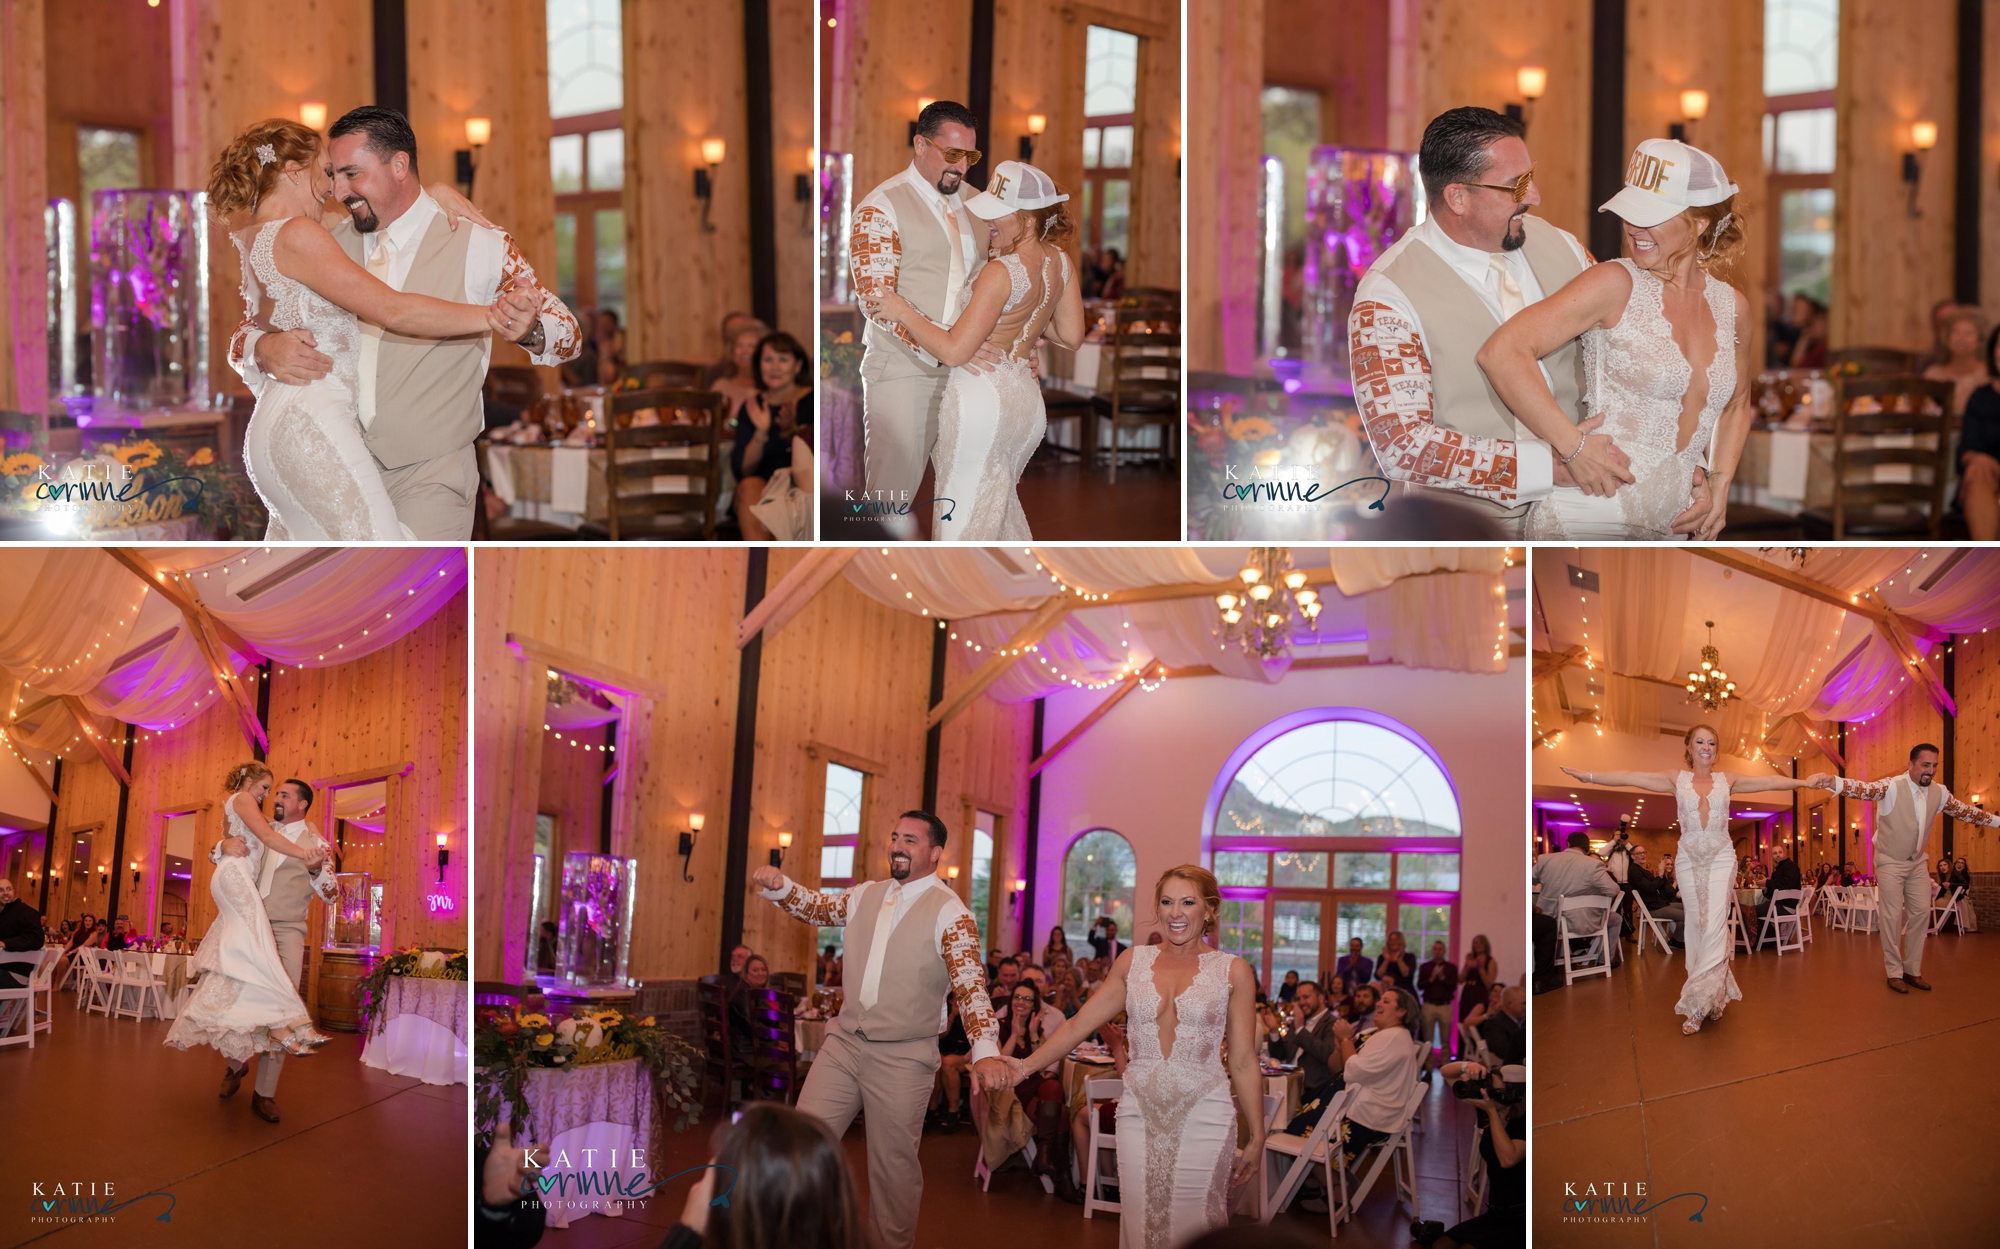 Bride and groom have fun first dance at Fall Colorado wedding